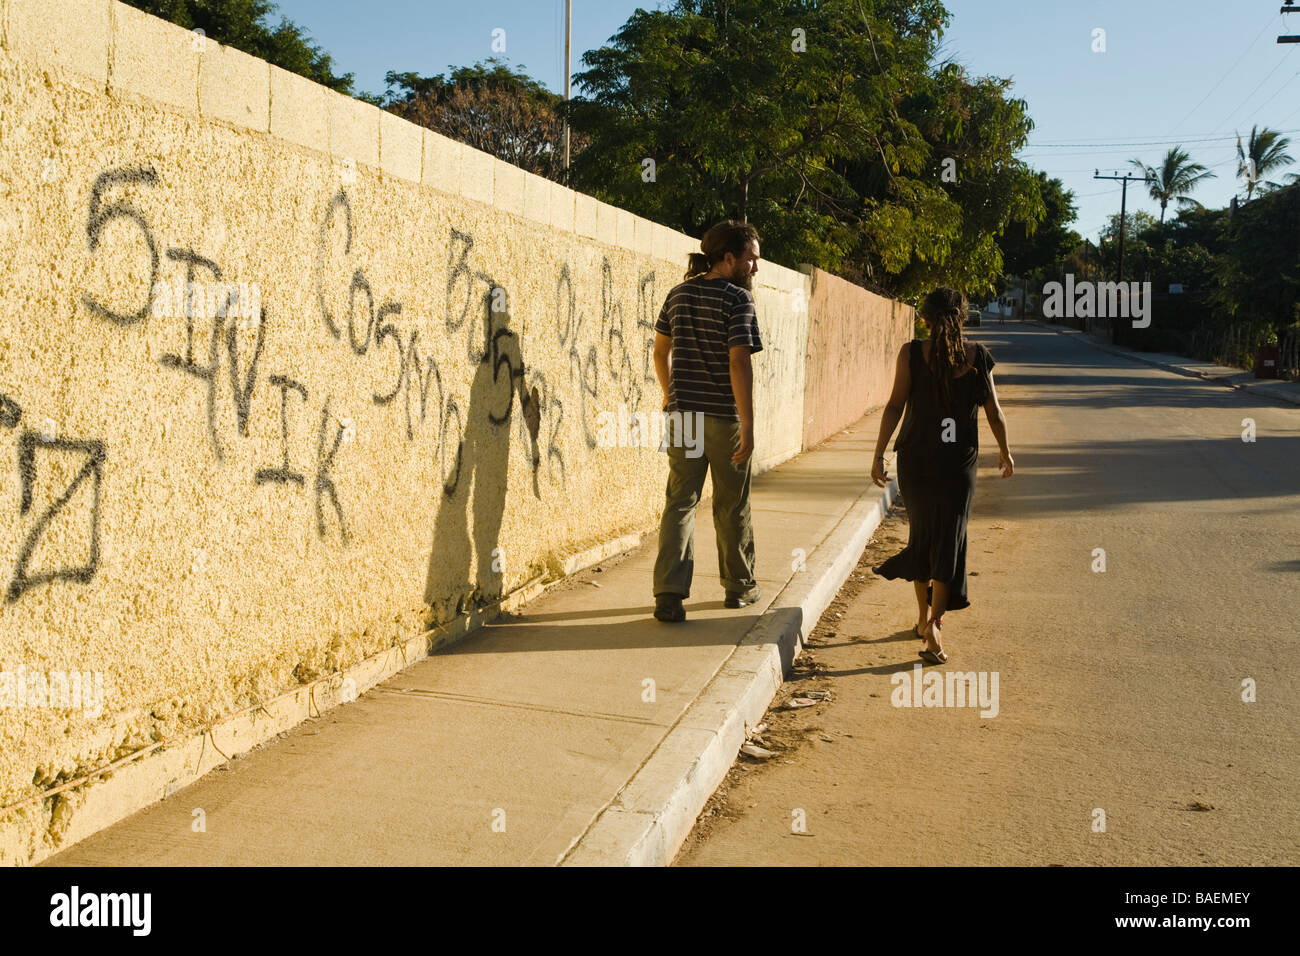 MEXICO La Playita Young adult couple walk past graffiti painted with black spray paint on yellow wall in small Mexican town Stock Photo